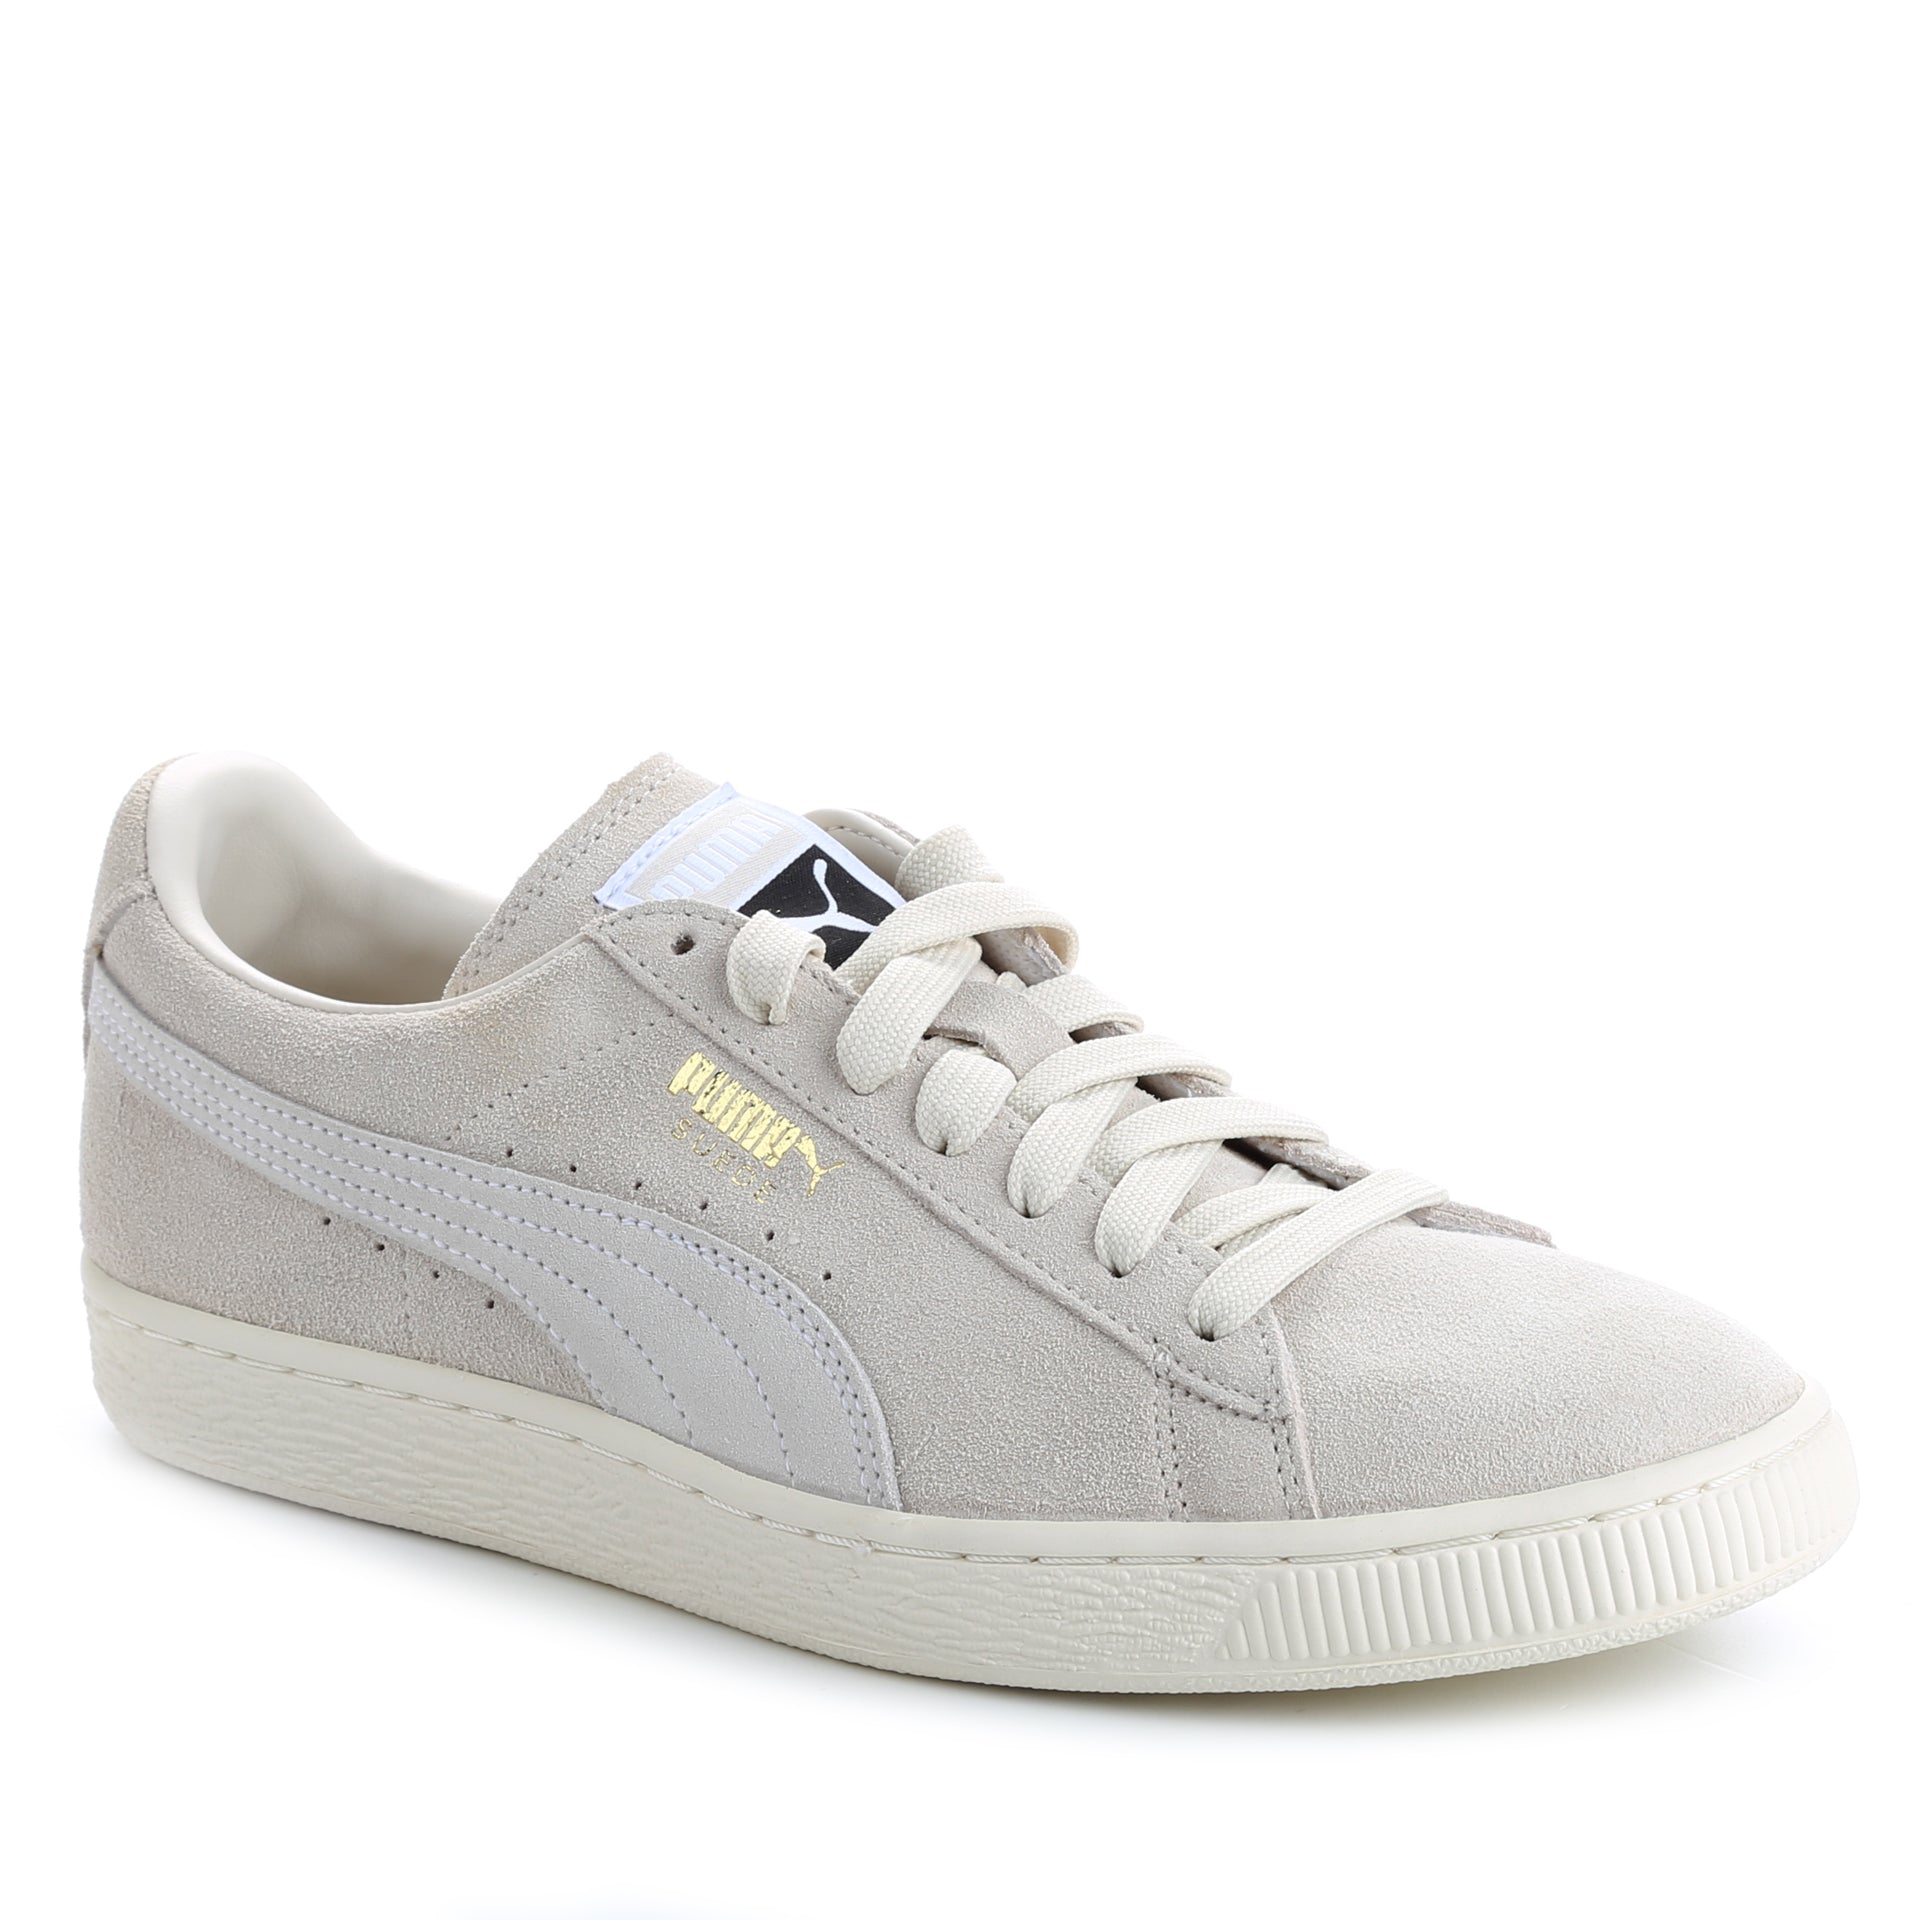 Soms soms tapijt compileren Puma Suede Classic - Birch/White - New Star